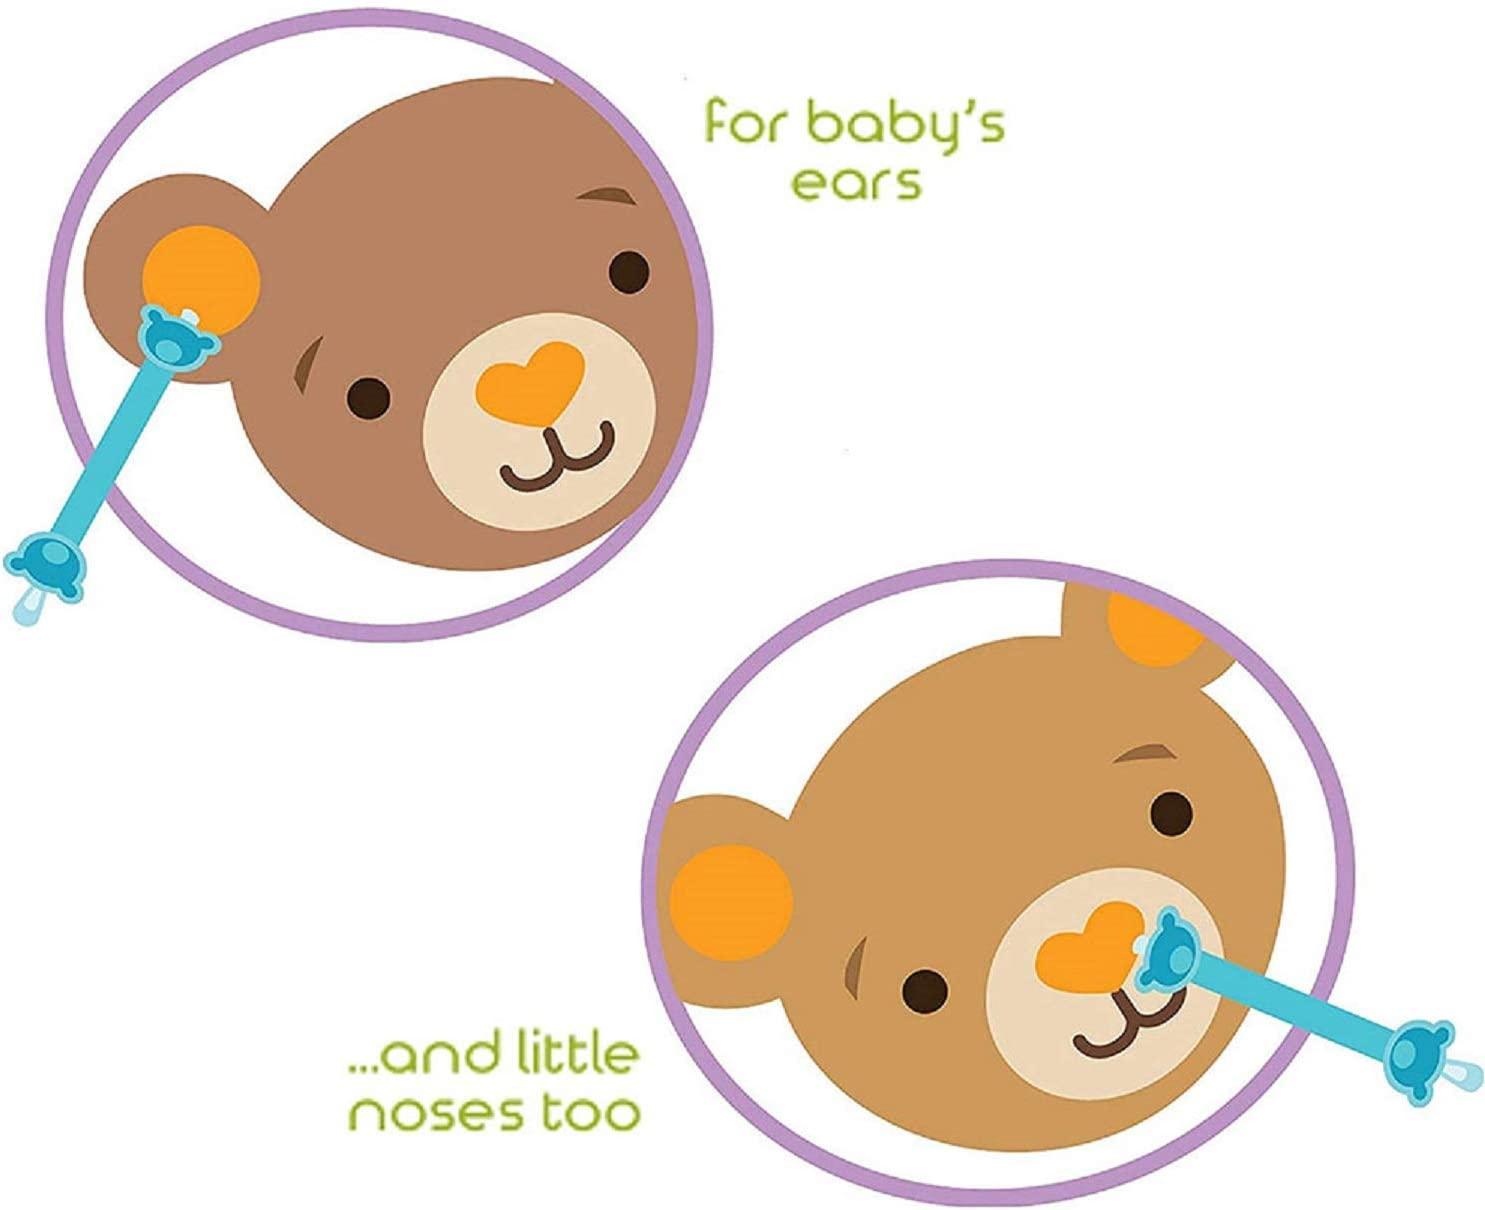 Oogiebear oogiebear - Patented Nose and Ear Gadget. Safe, Easy Nasal Booger  and Ear Cleaner for Newborns and Infants. Dual Earwax and Snot